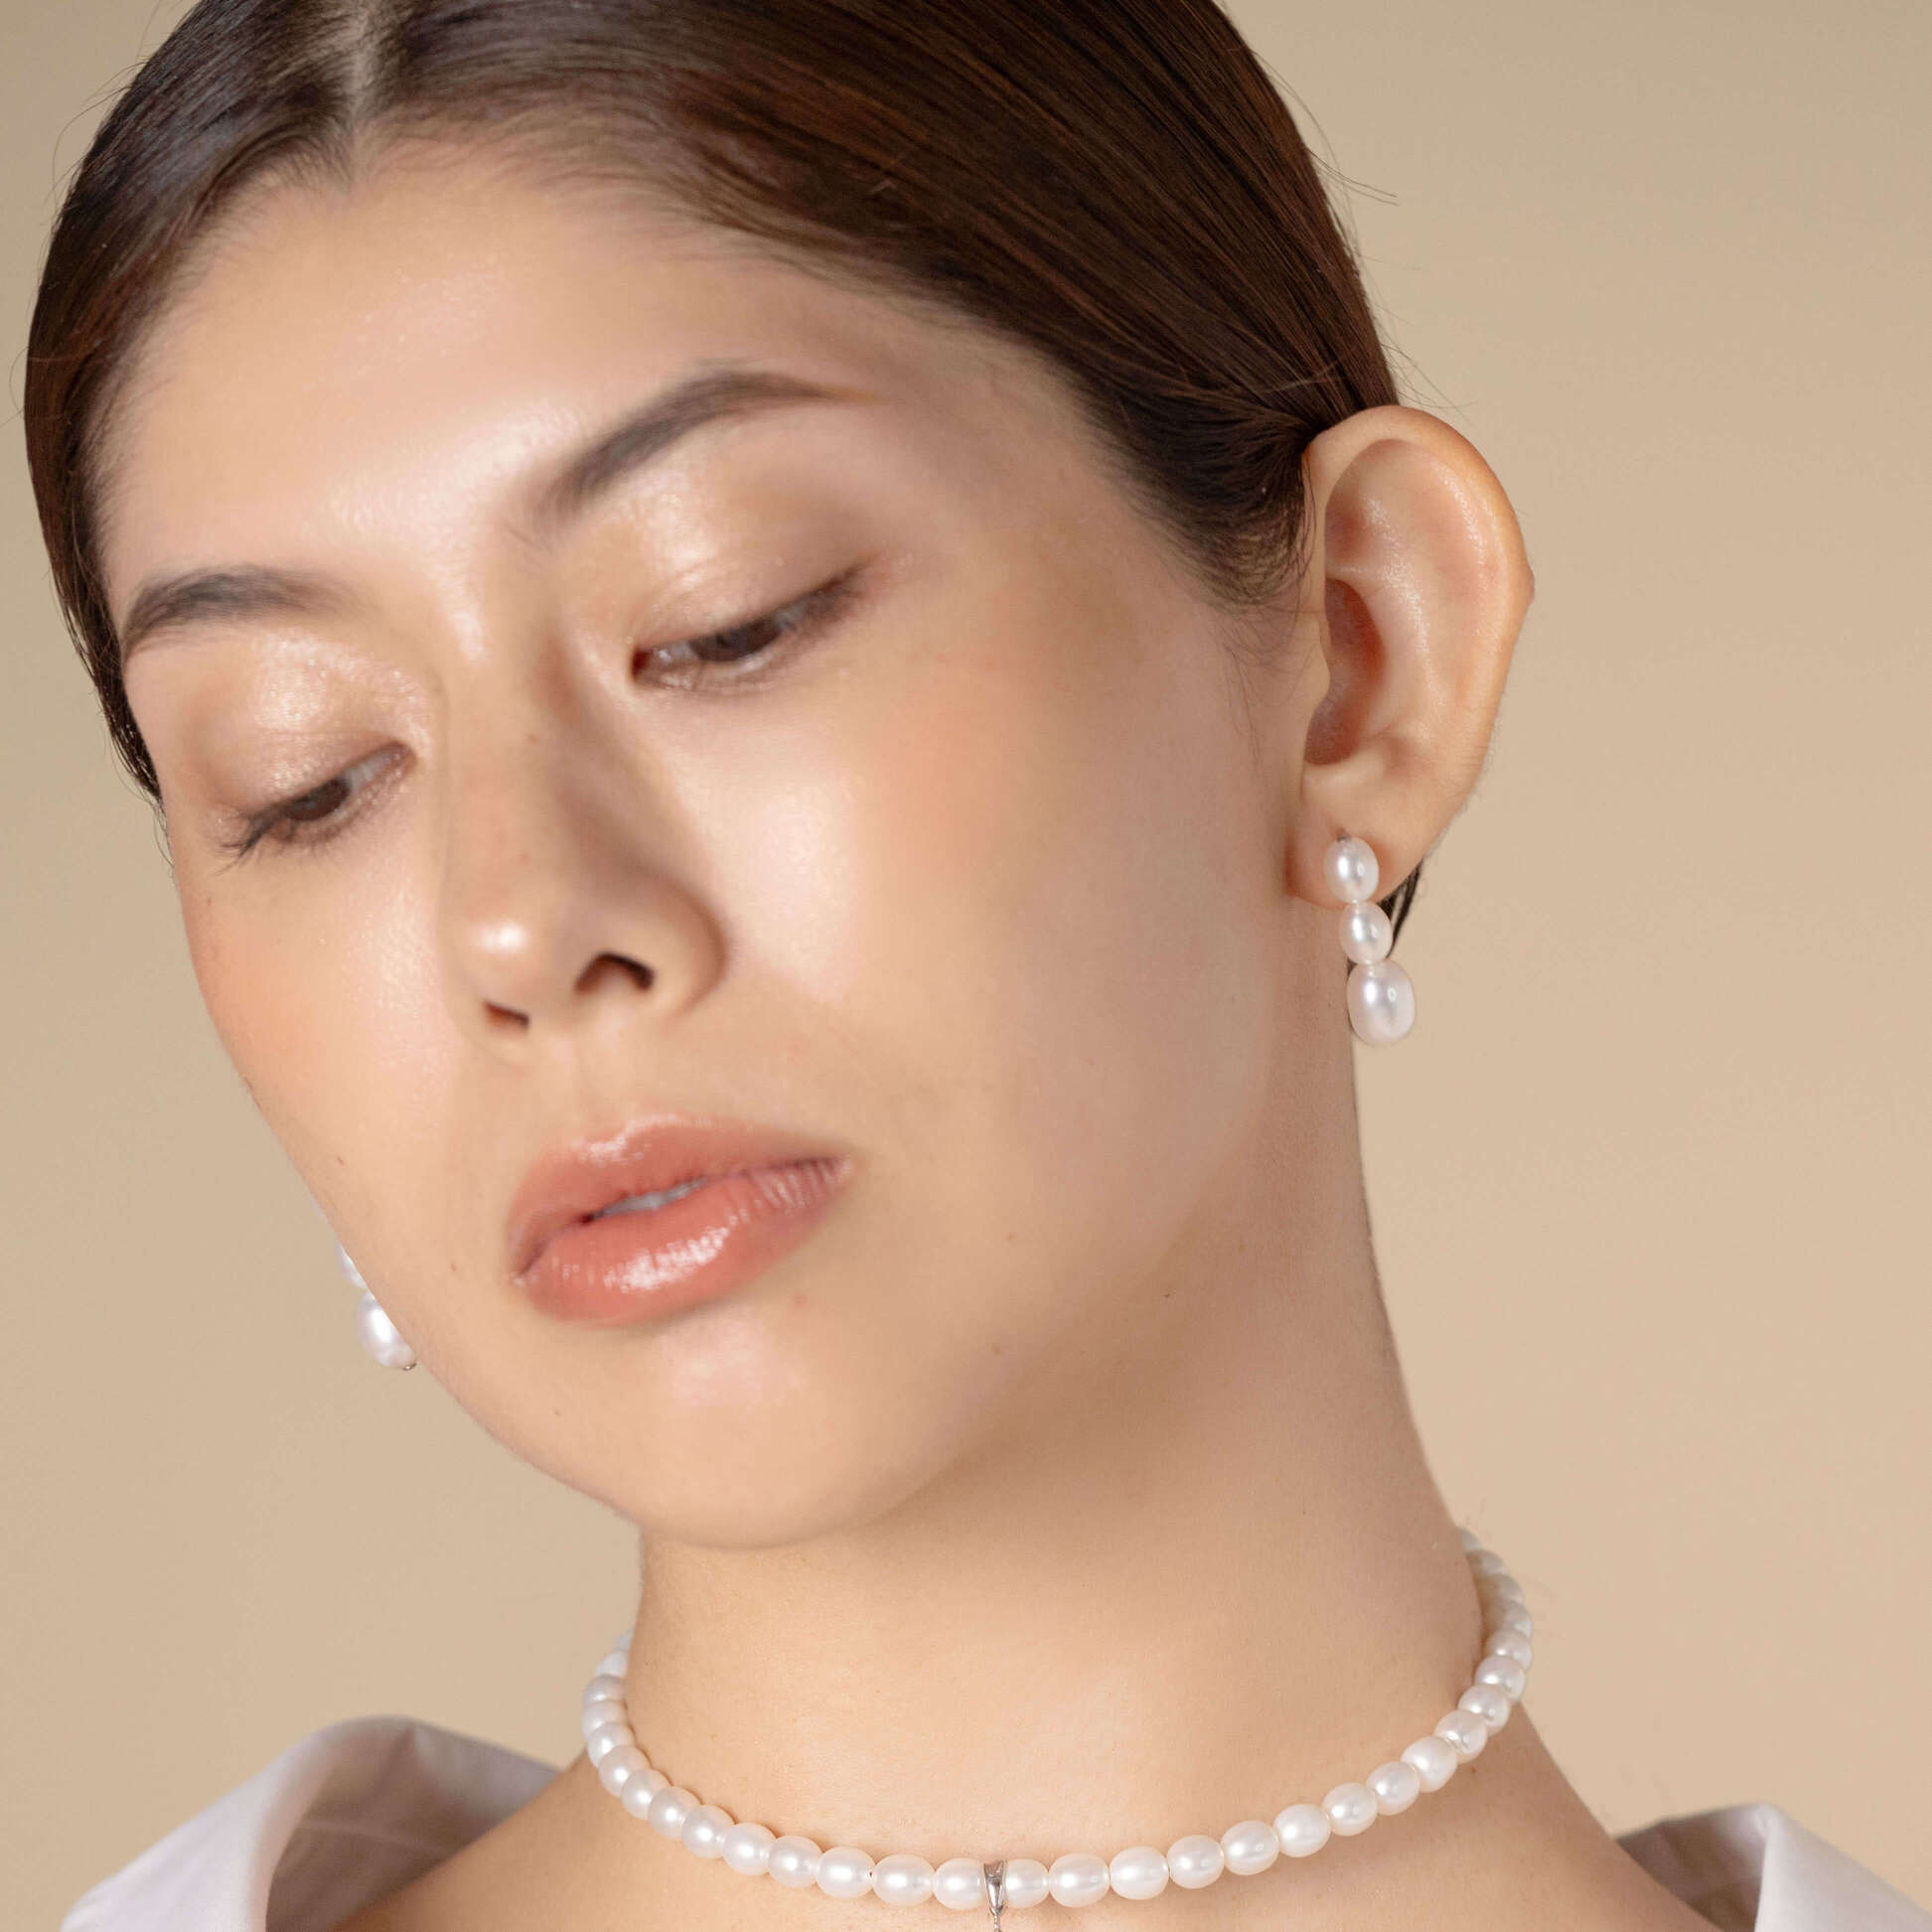 Elevate your look with a sophisticated black top and stunning pearl earrings on a woman. Timeless and classy!